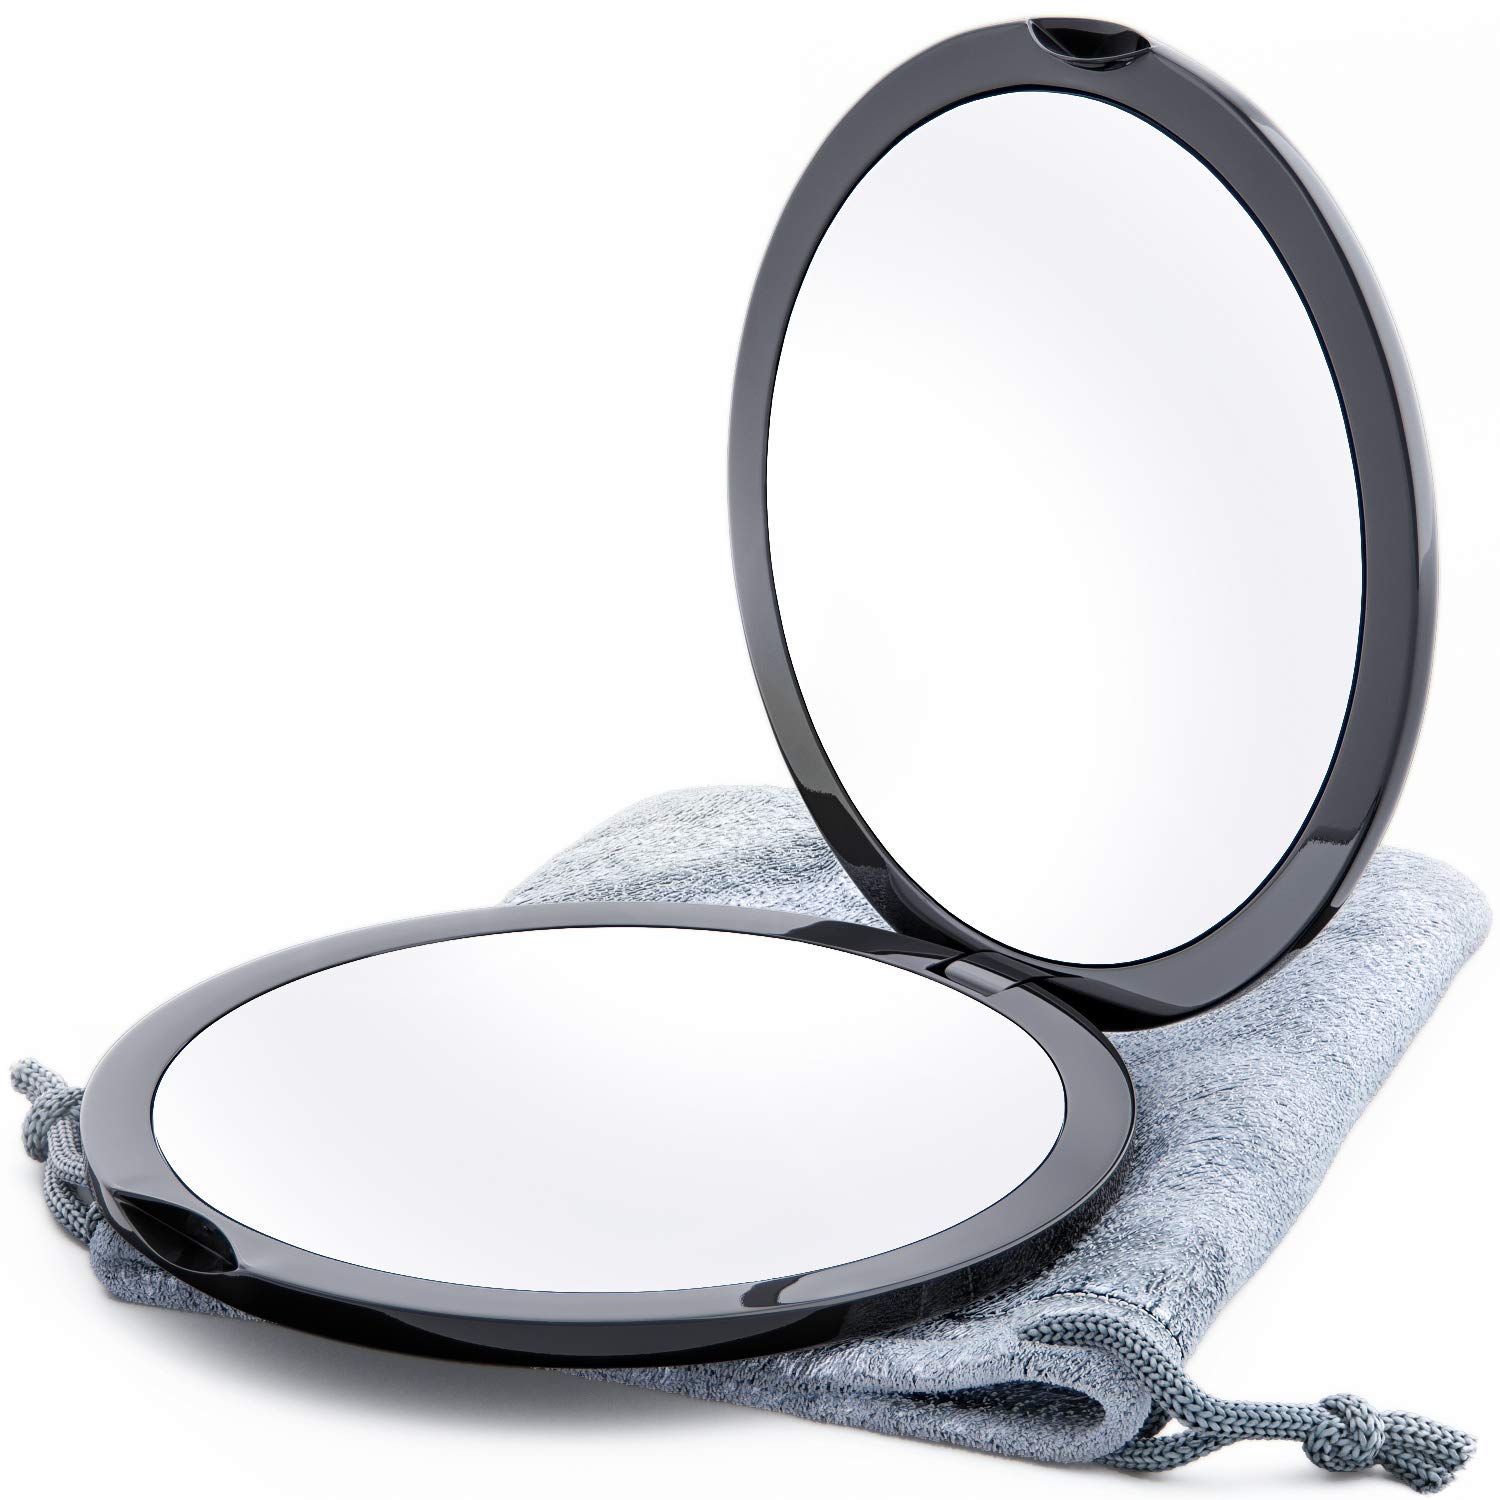 MAJESTIQUE Compact Round Makeup Mirror, Double-Sided 1X/2X Magnification  Portable Hand Mirror, Small Mirror Ultra